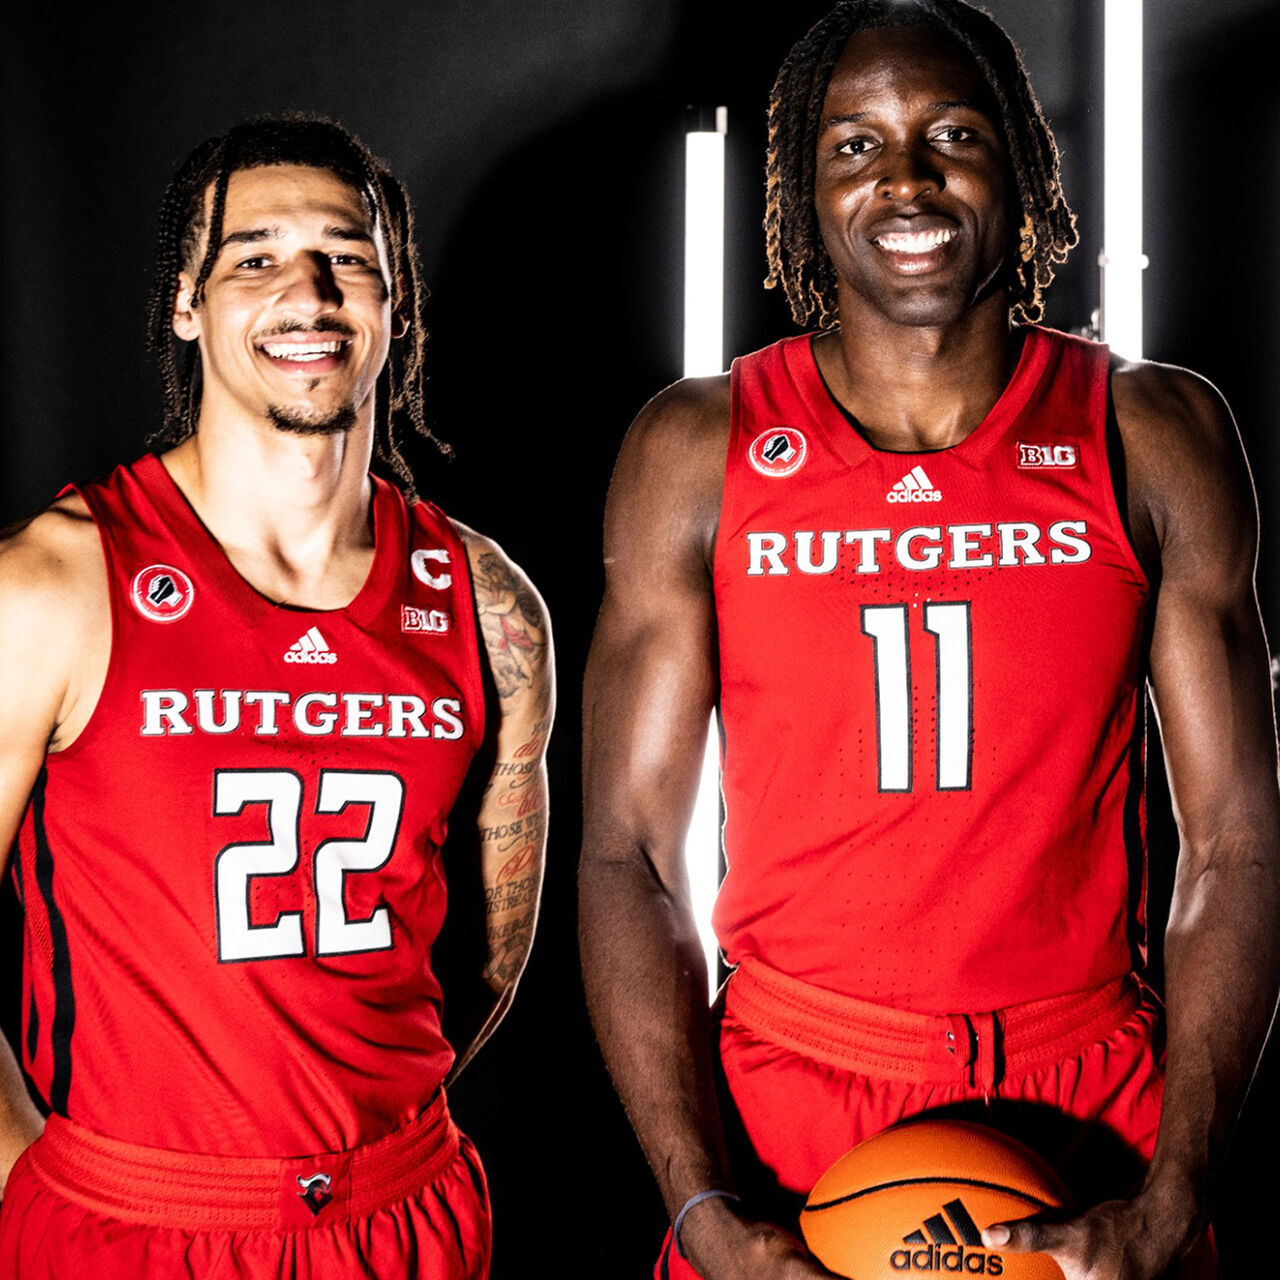 Two Scarlet Knight men's basketball players in their jersey's smiling with bright lights behind them image number 0